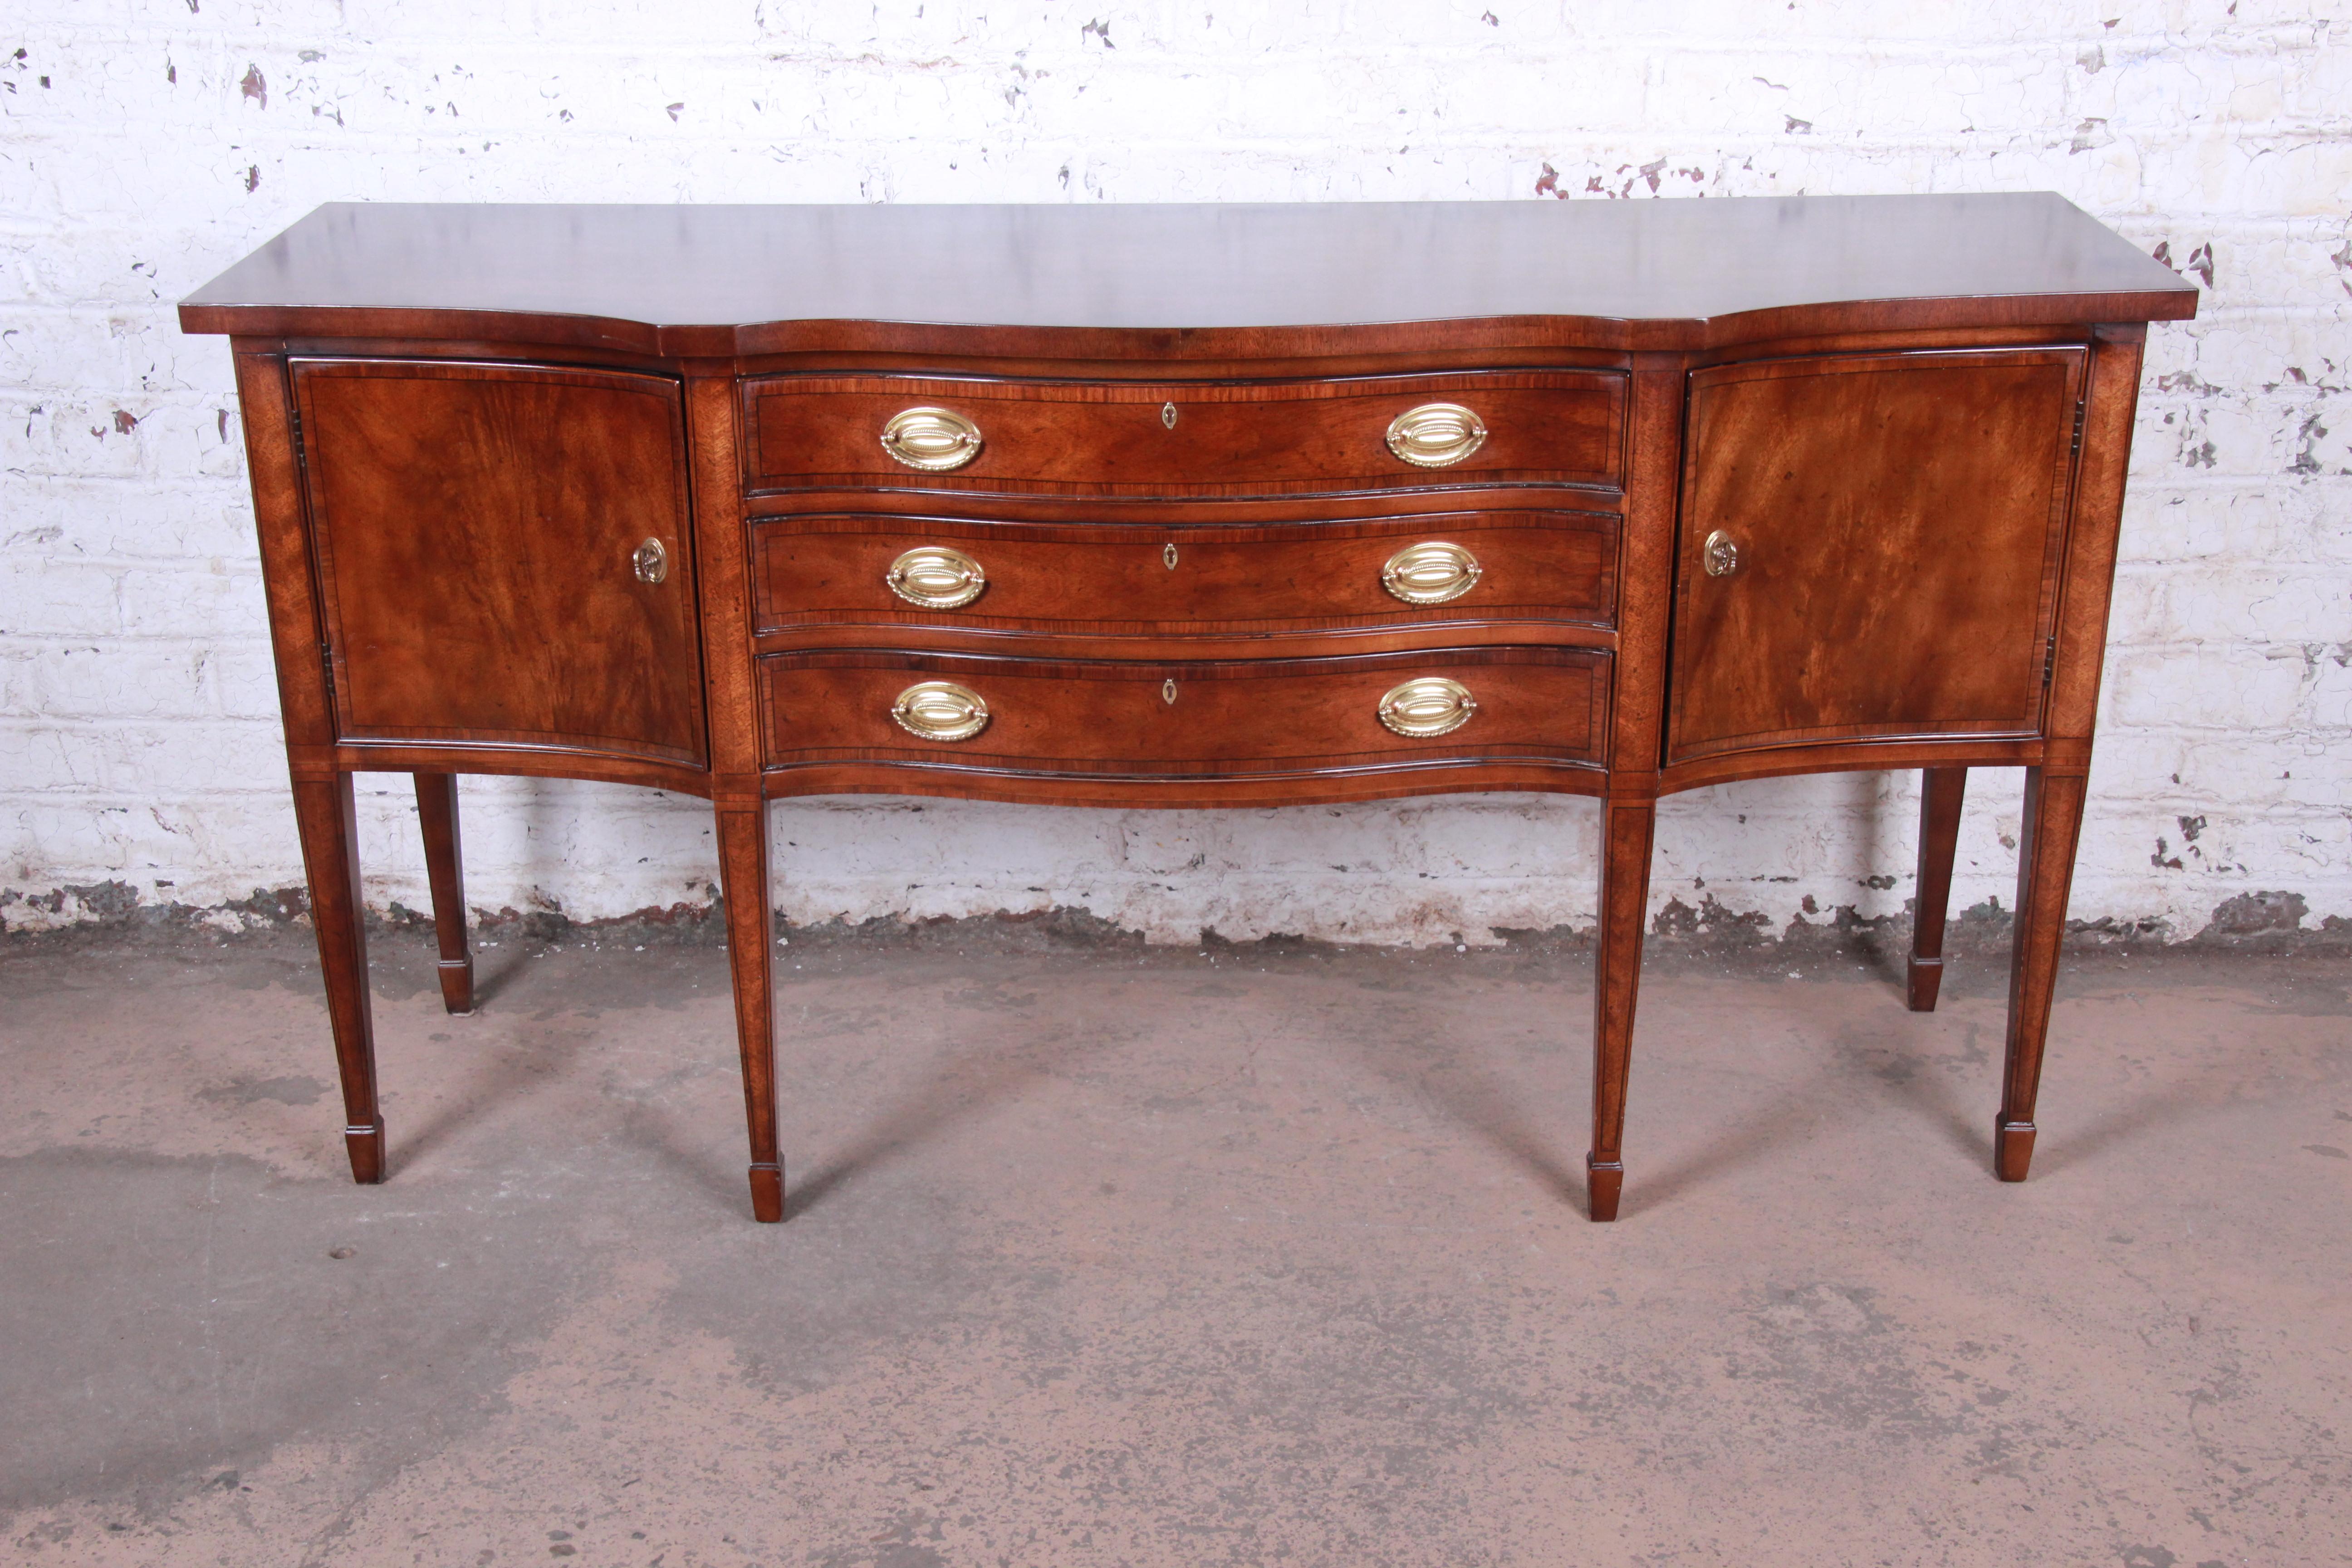 An exceptional banded inlaid flame mahogany Federal style sideboard credenza or bar server

By Henredon 